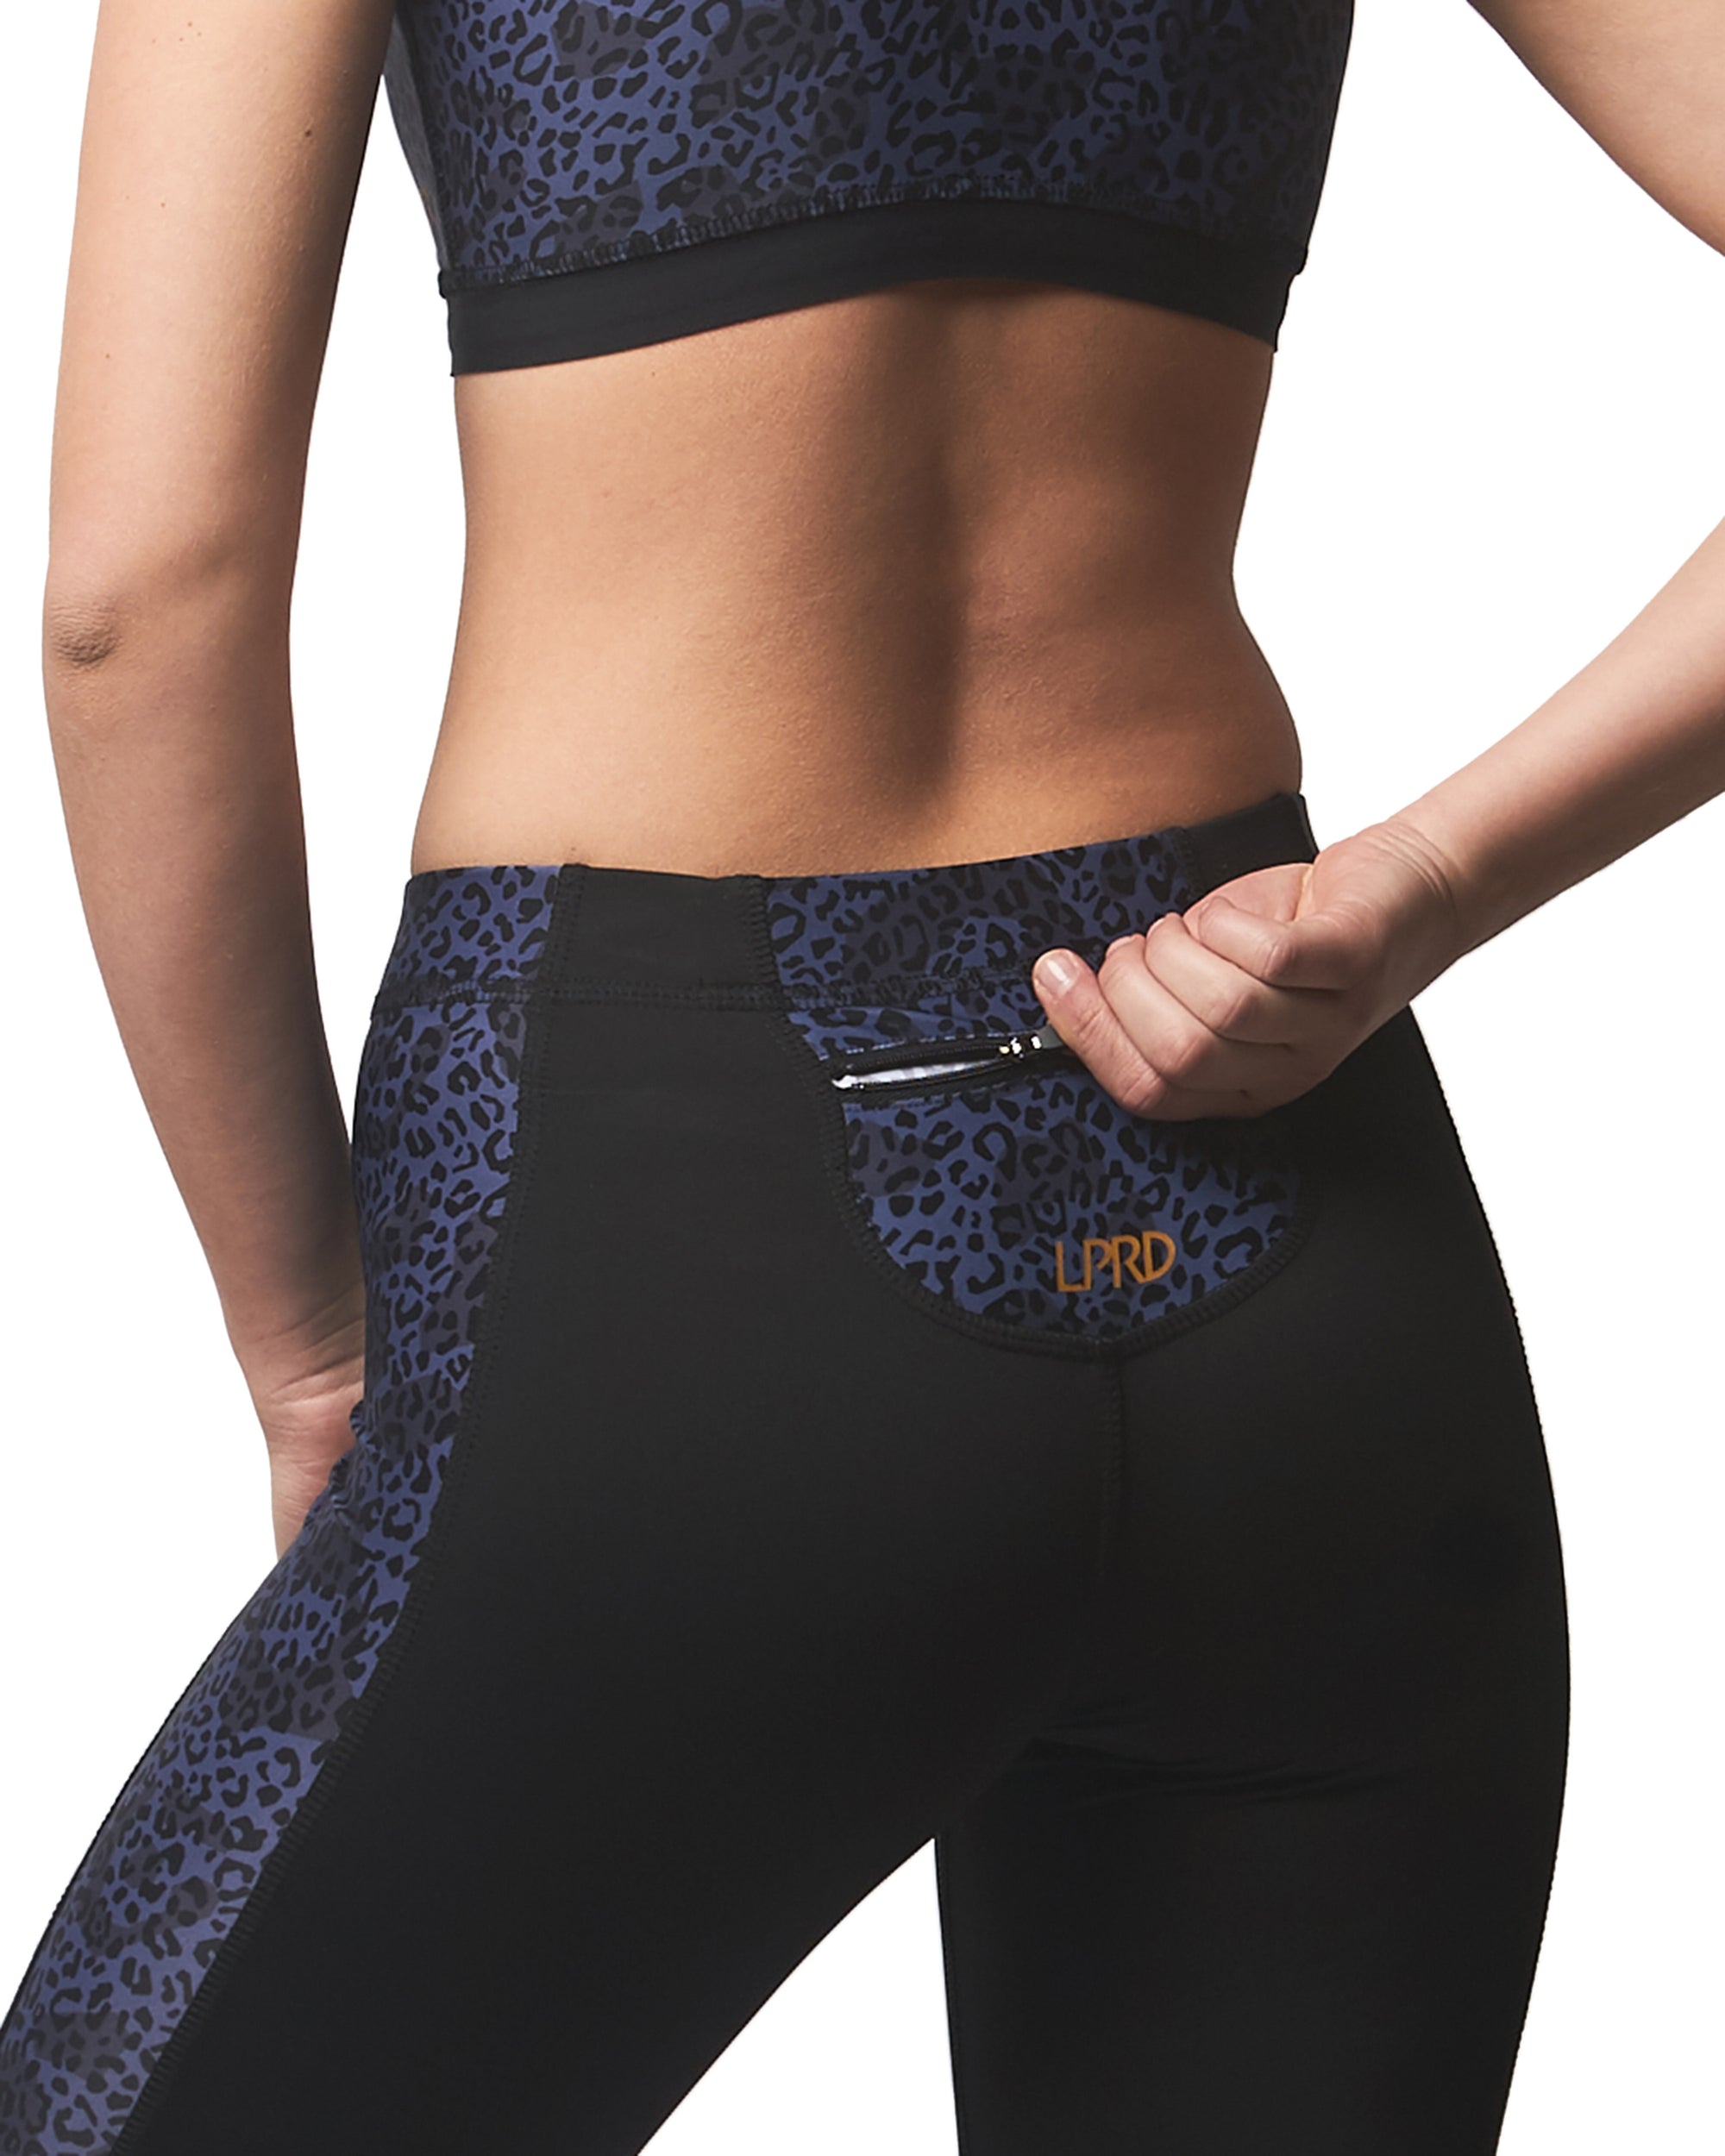 Workout leggings - Black and subtle navy blue leopard print - Fashionable  performance sports leggings for running, jogging, yoga, pilates and gym -  LPRD